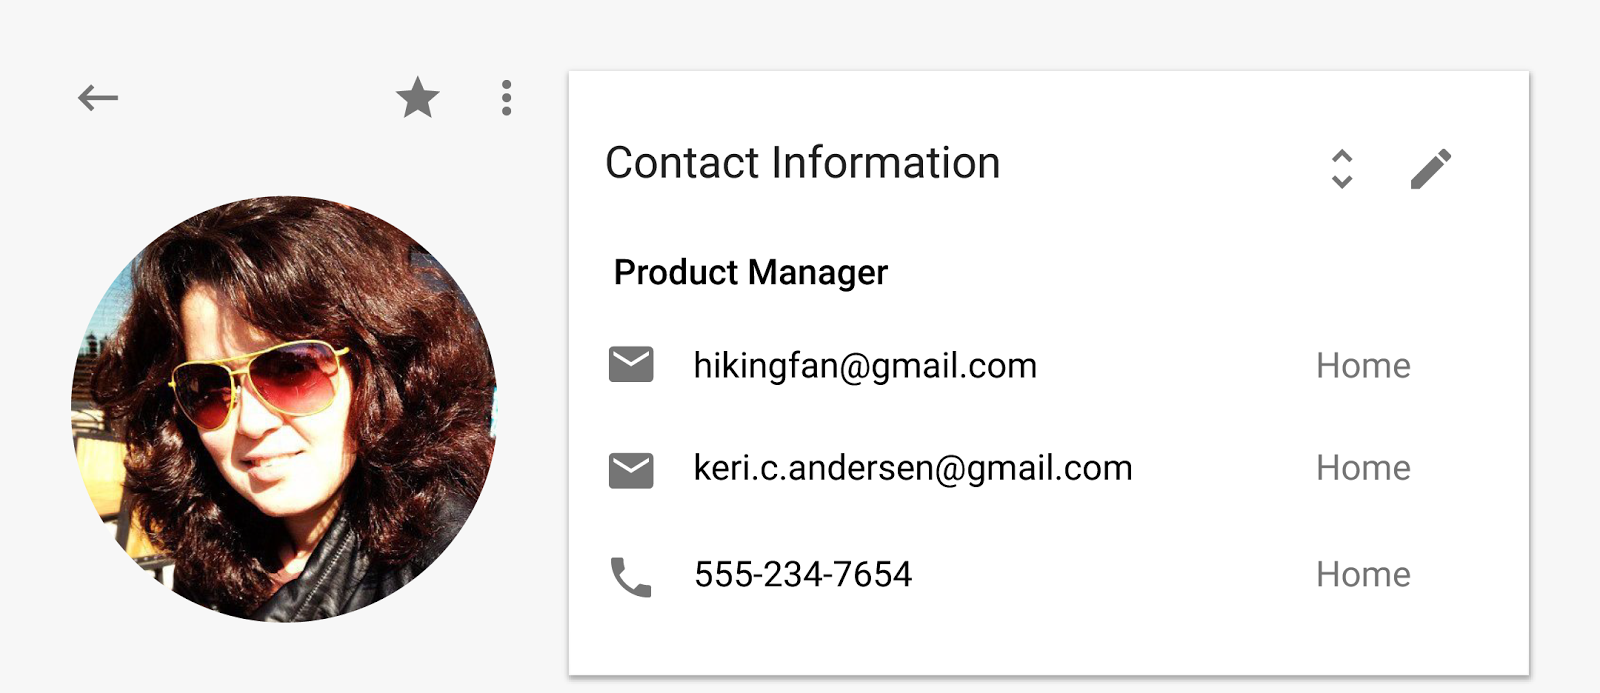 Contacts preview 3.5 Google revamps Contacts with new design, integrates emails and meetings